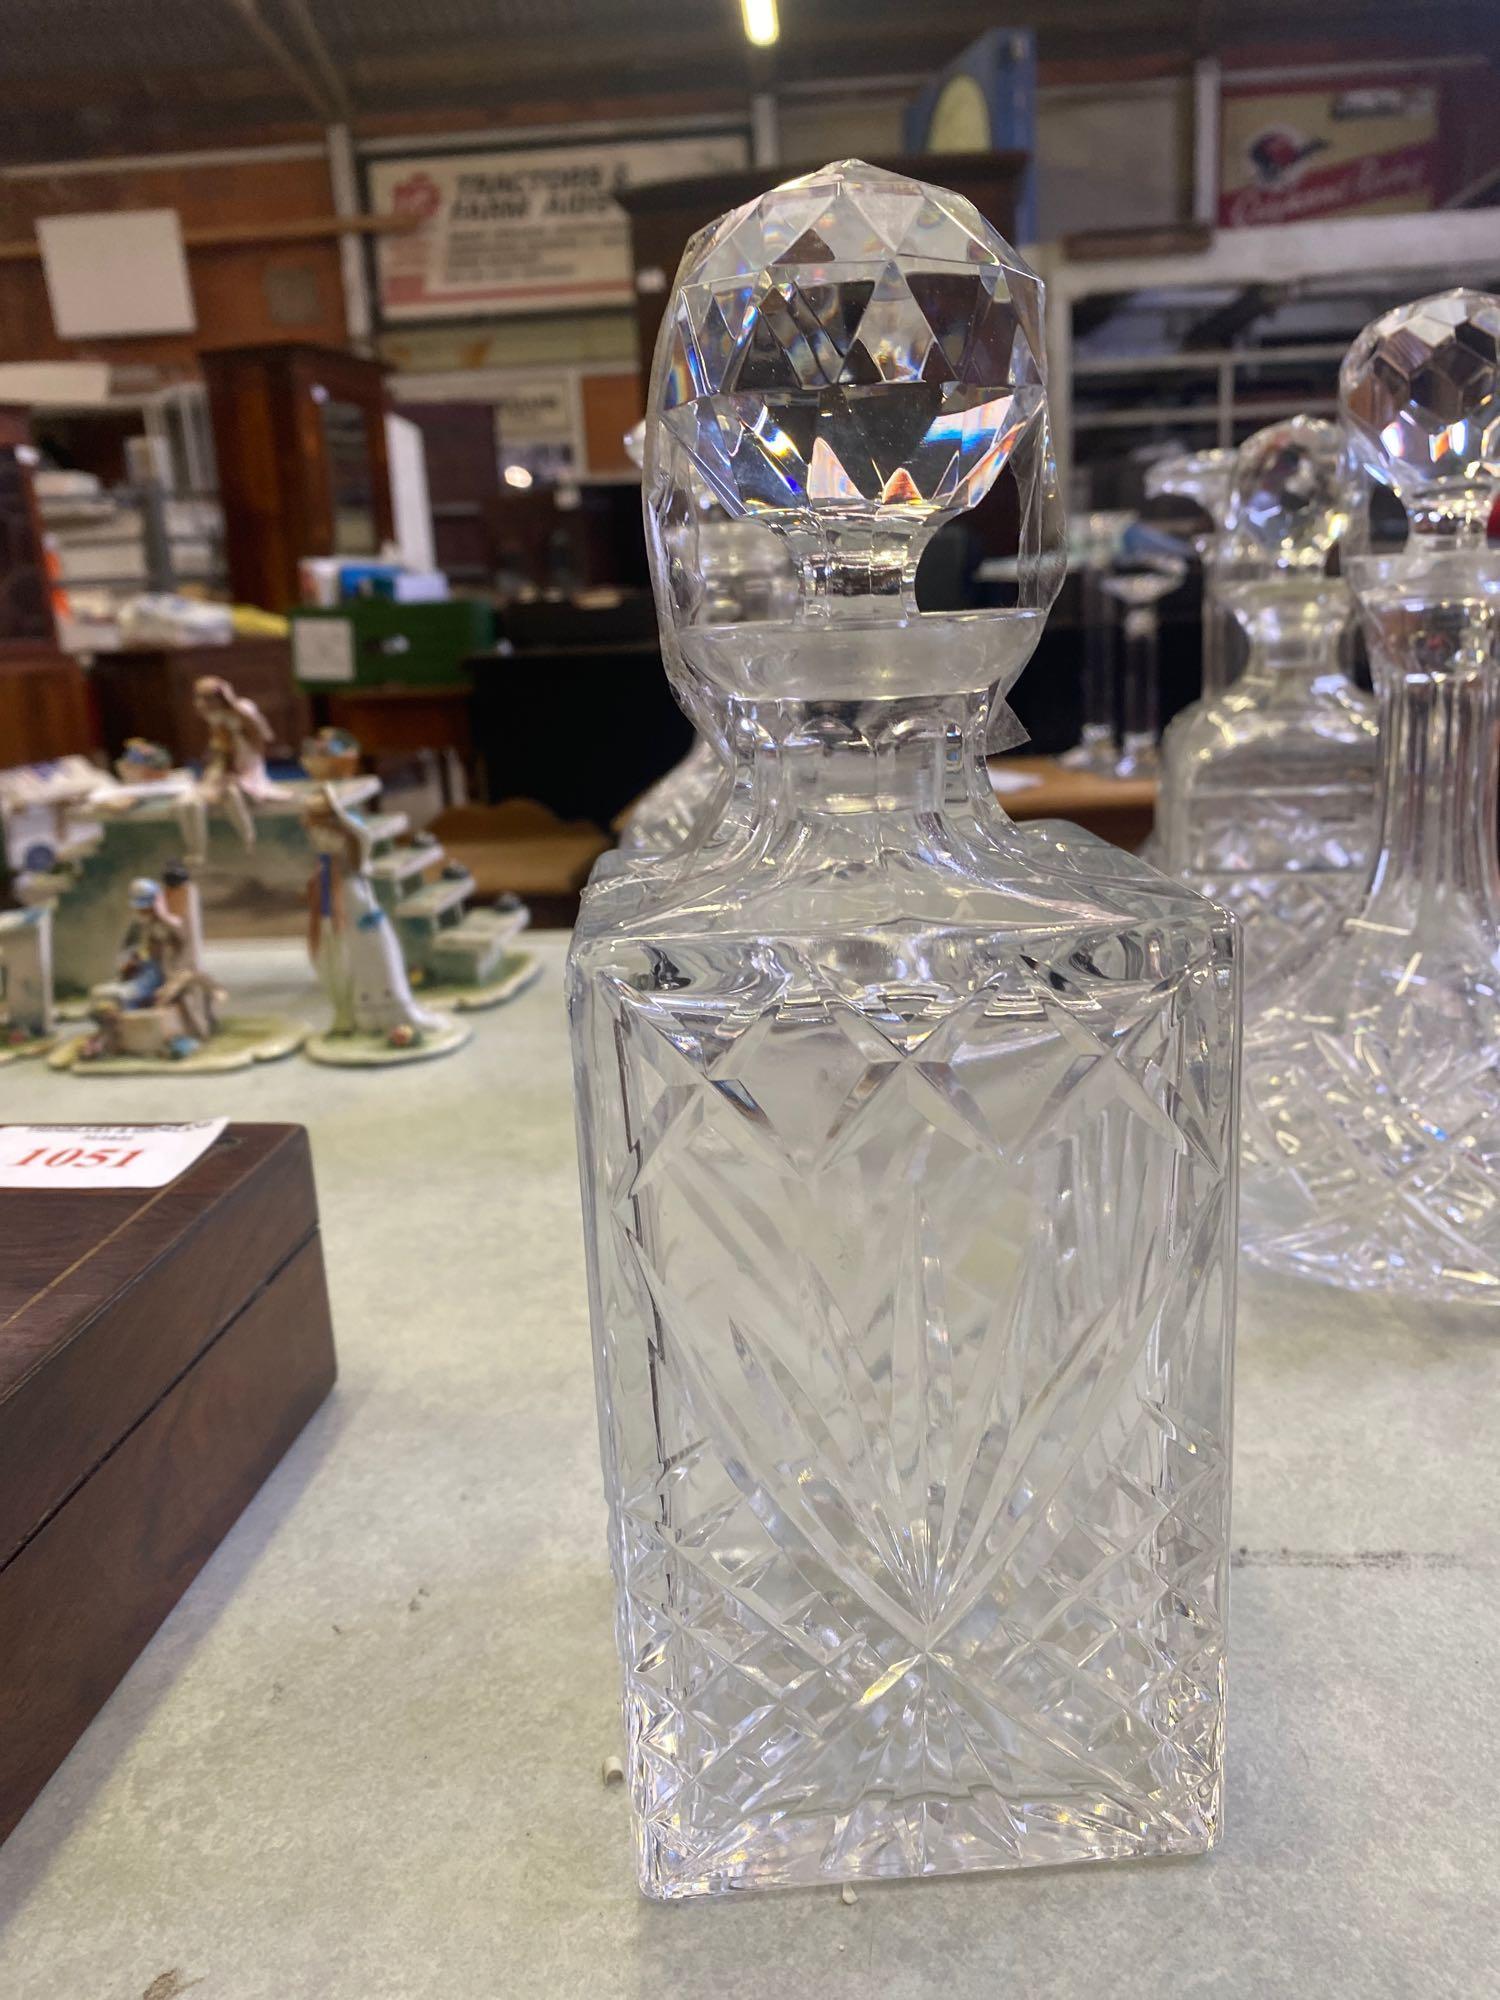 5 cut glass decanters together with a Stuart crystal glass decanter - Image 2 of 7